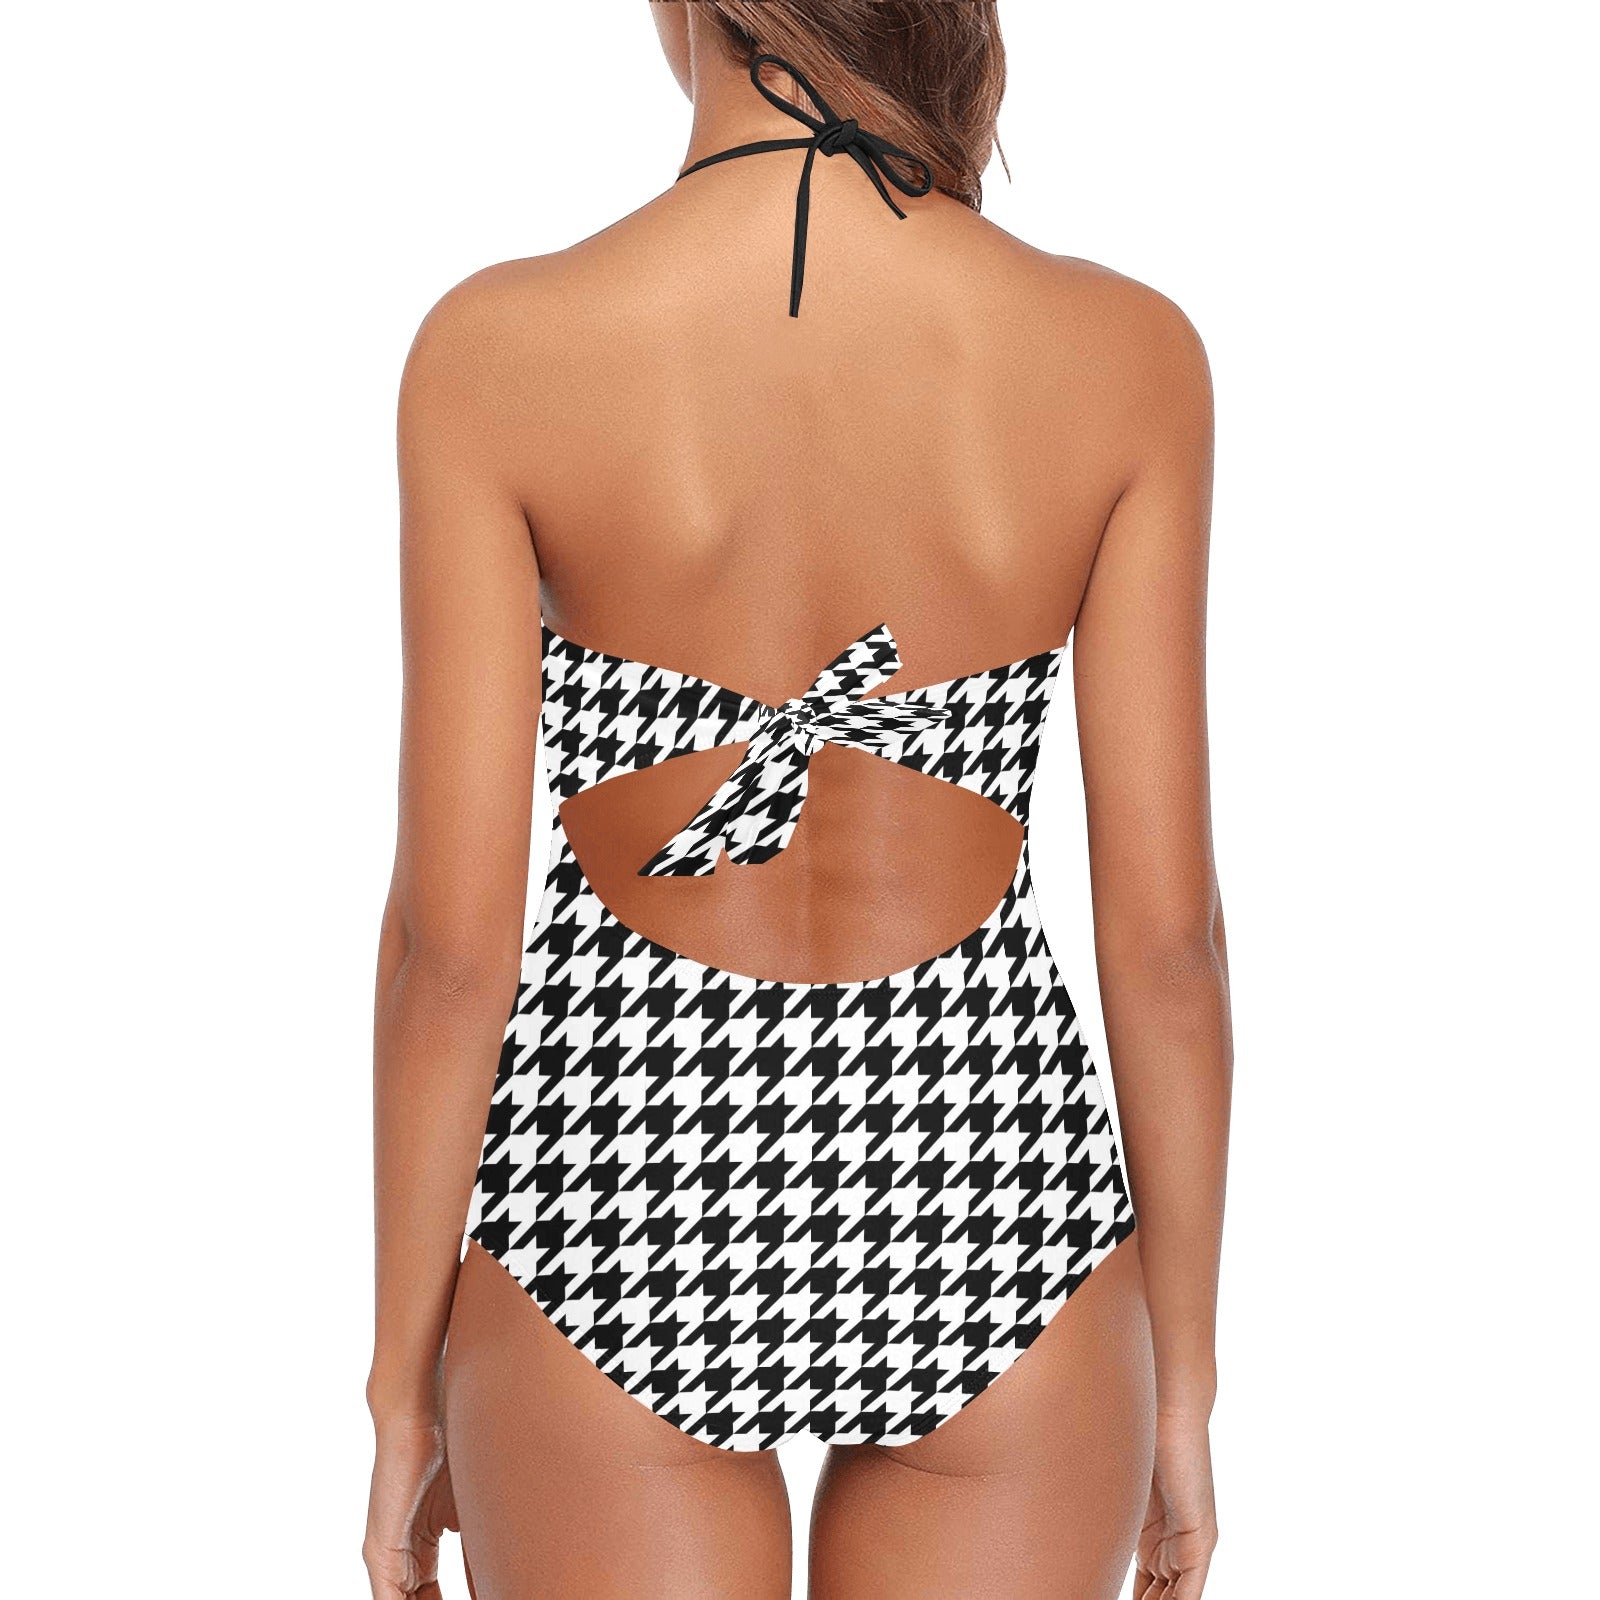 Houndstooth Lace Swimsuit Women, Pattern Black White One Piece Band Embossing Cute Designer Bathing Suit Padded Cups Plus Size Starcove Fashion